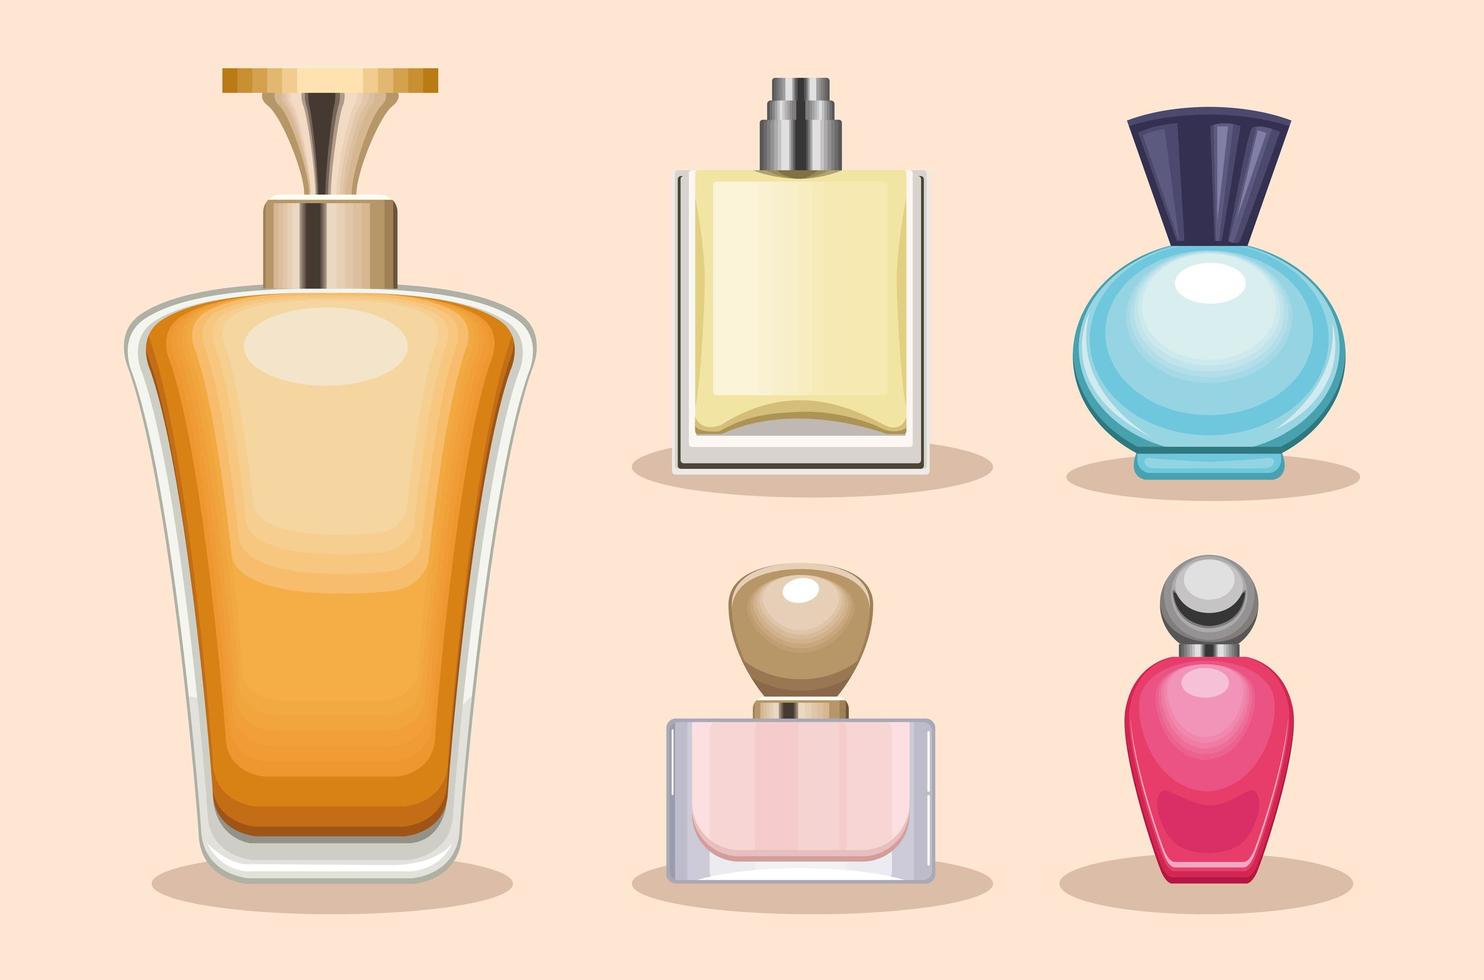 five perfumes bottles icons vector